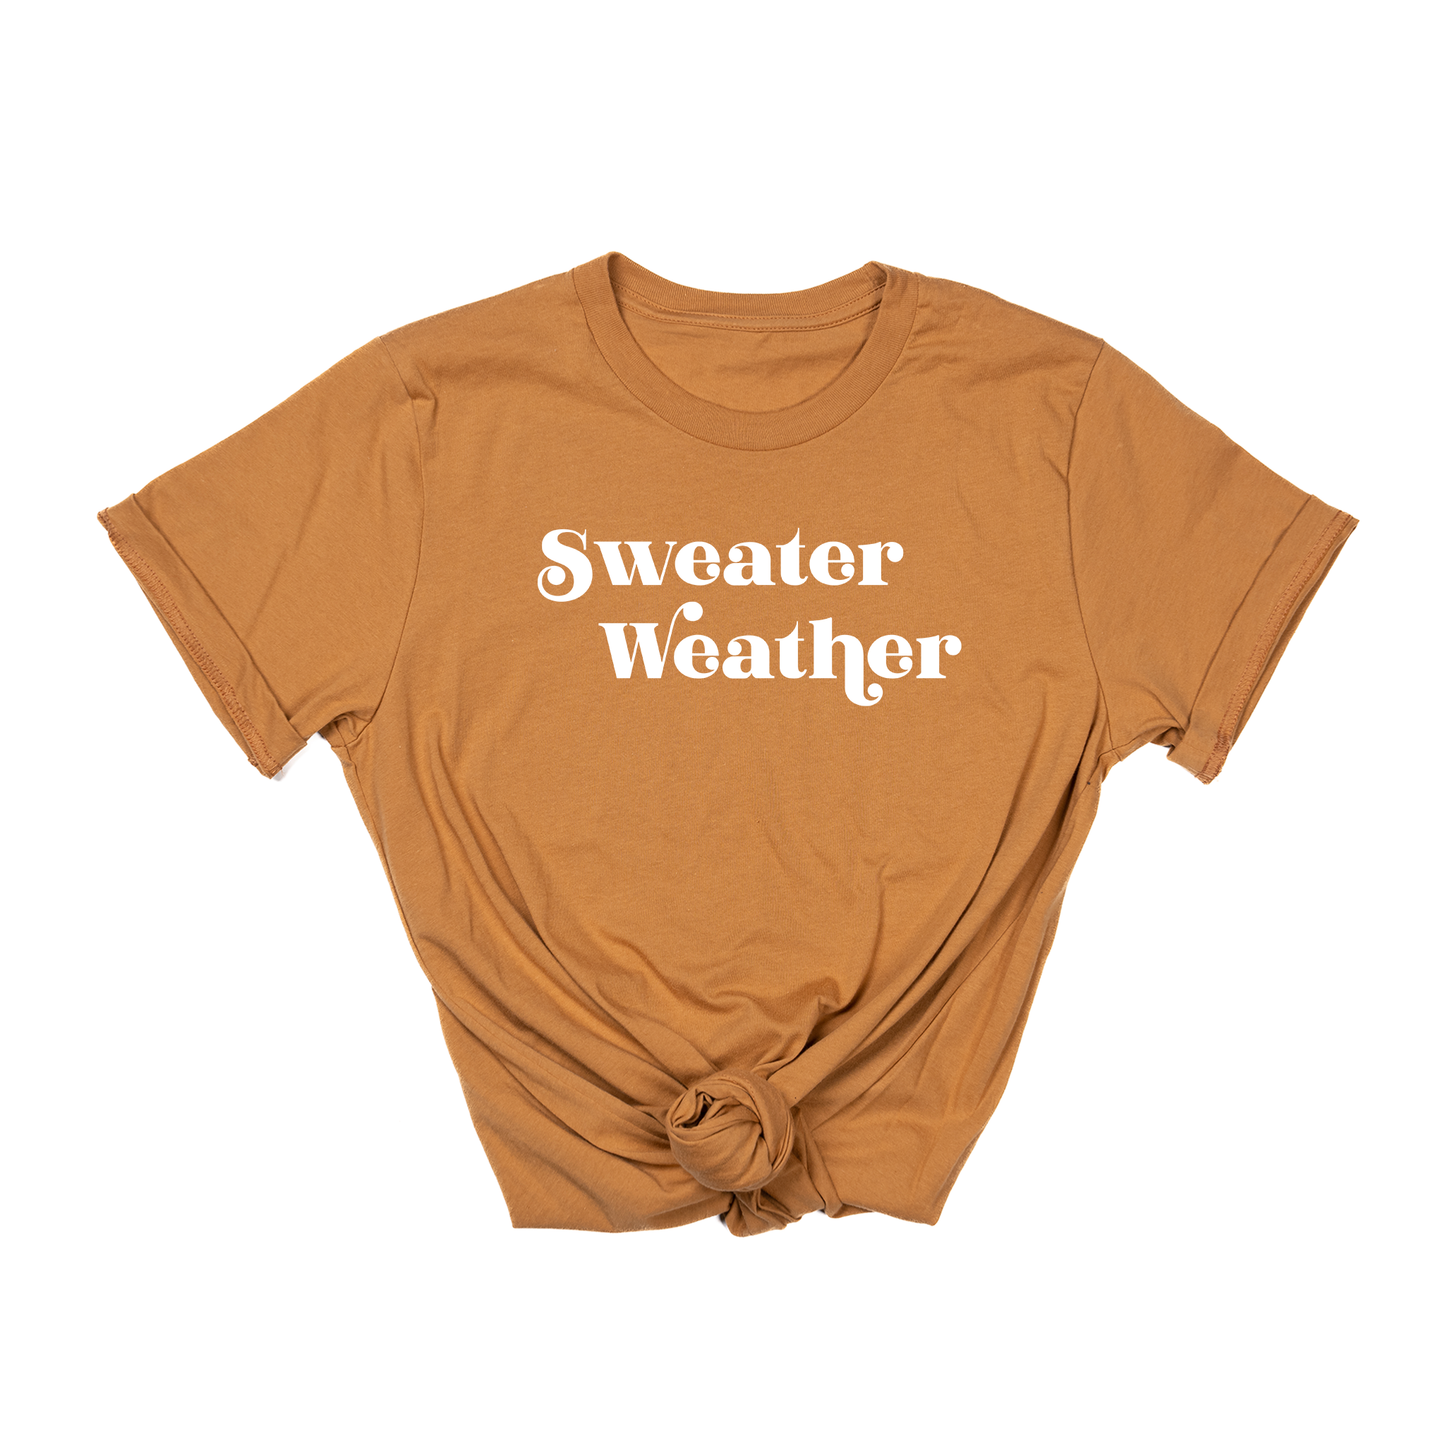 Sweater Weather (White) - Tee (Camel)